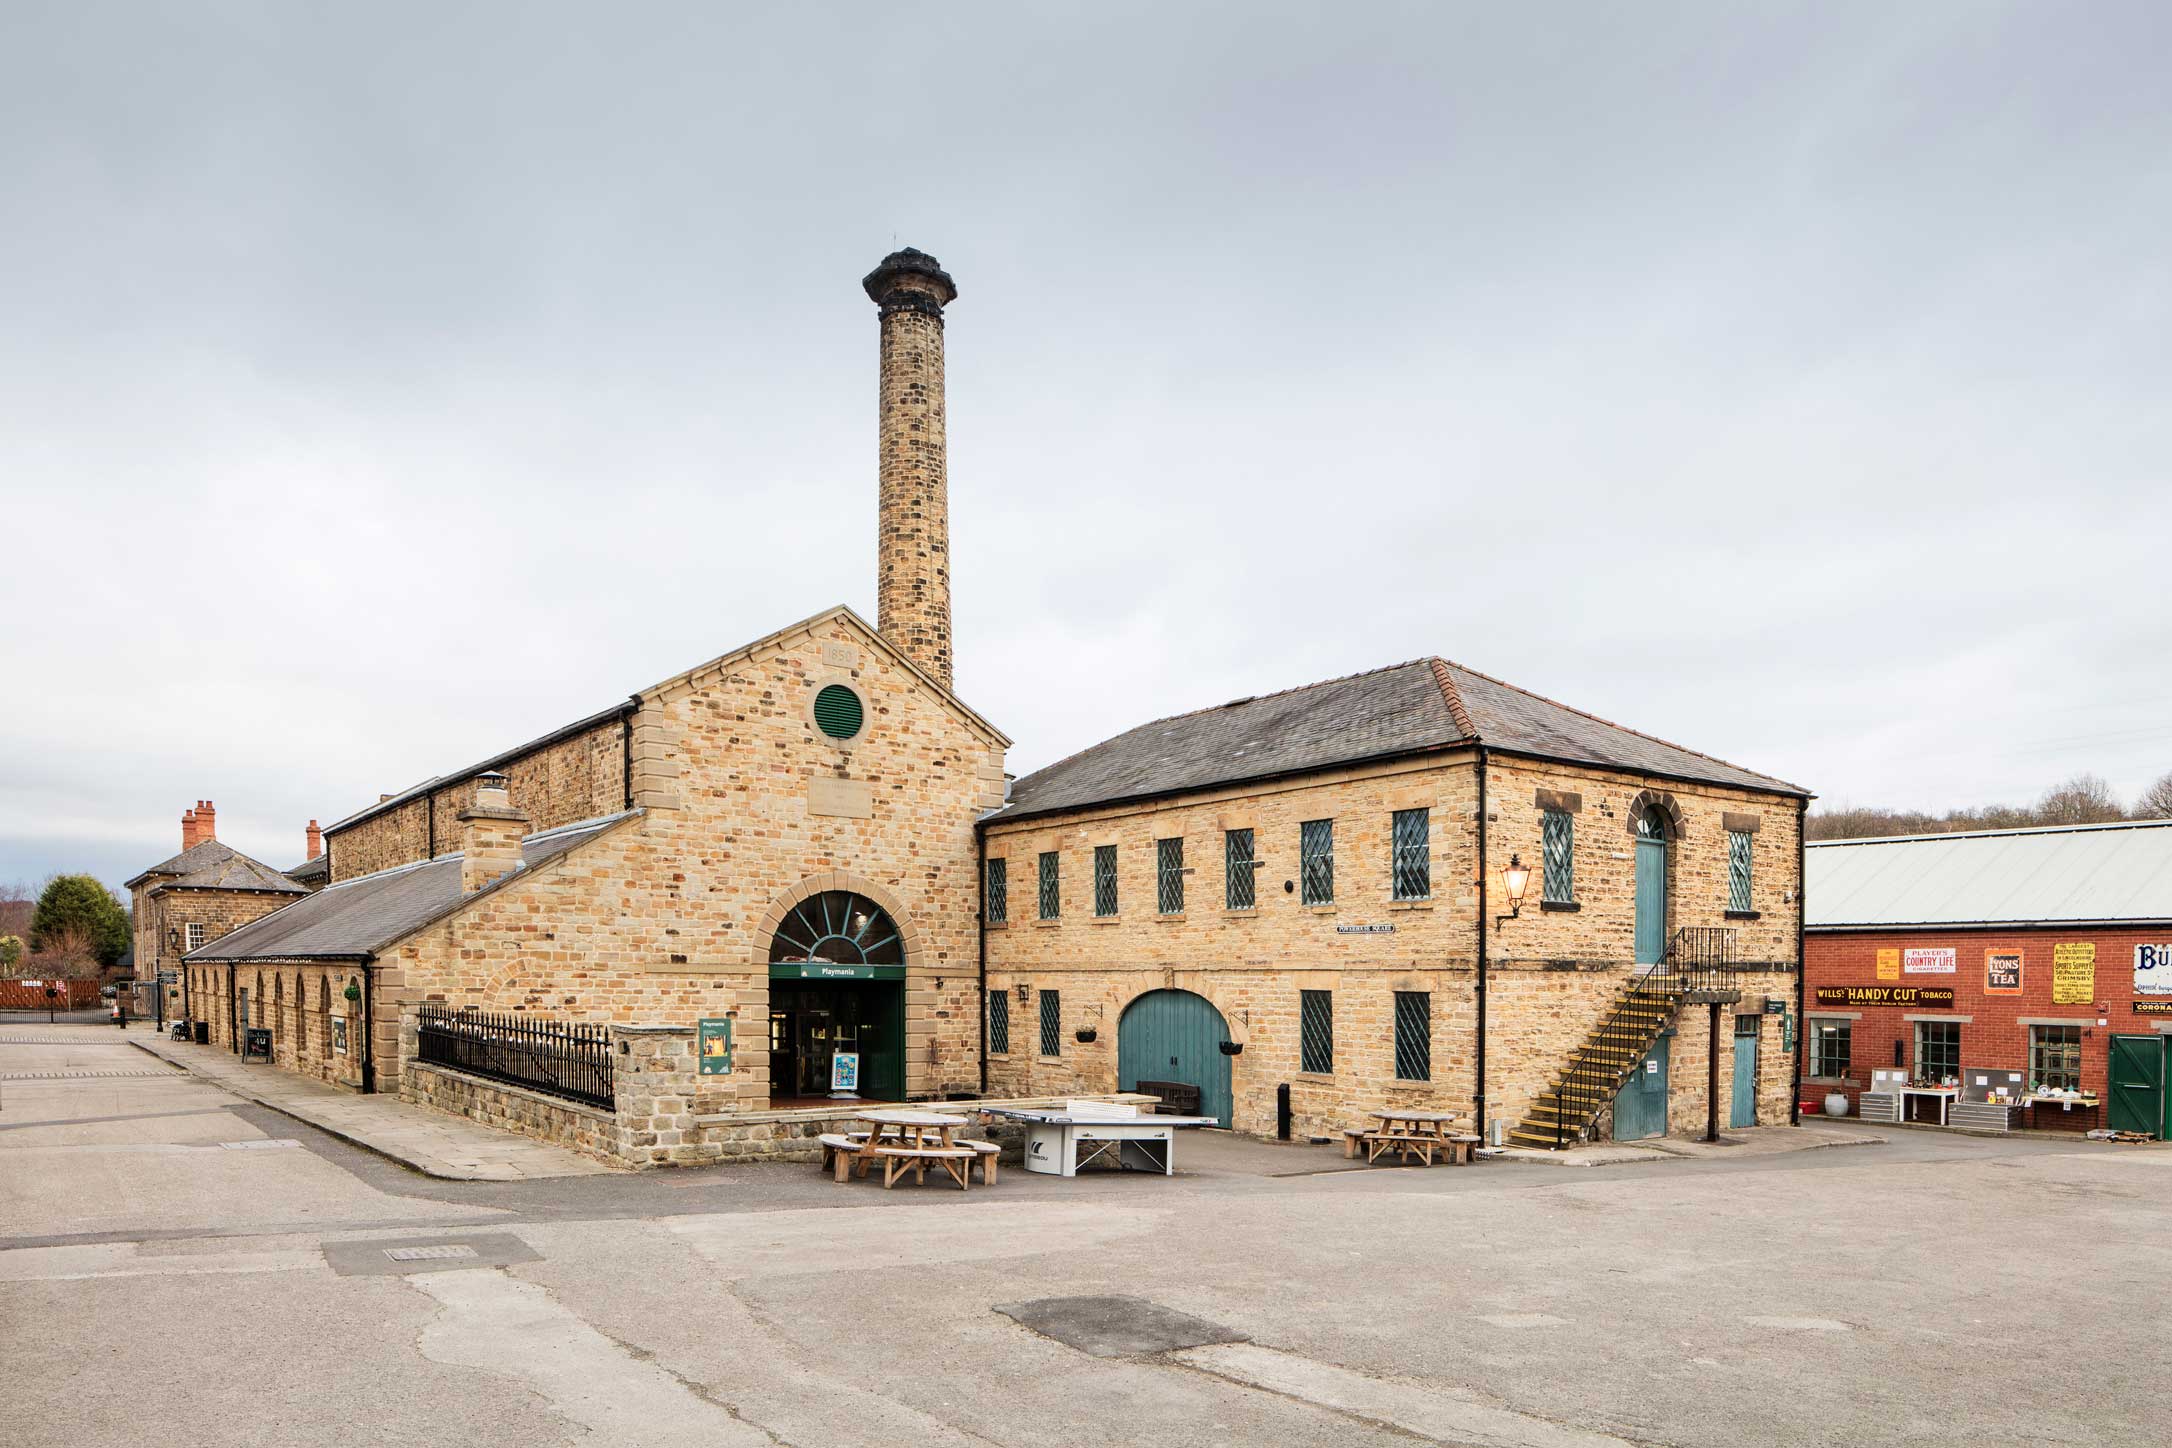 A group of stone built former workshops, now a heritage centre.